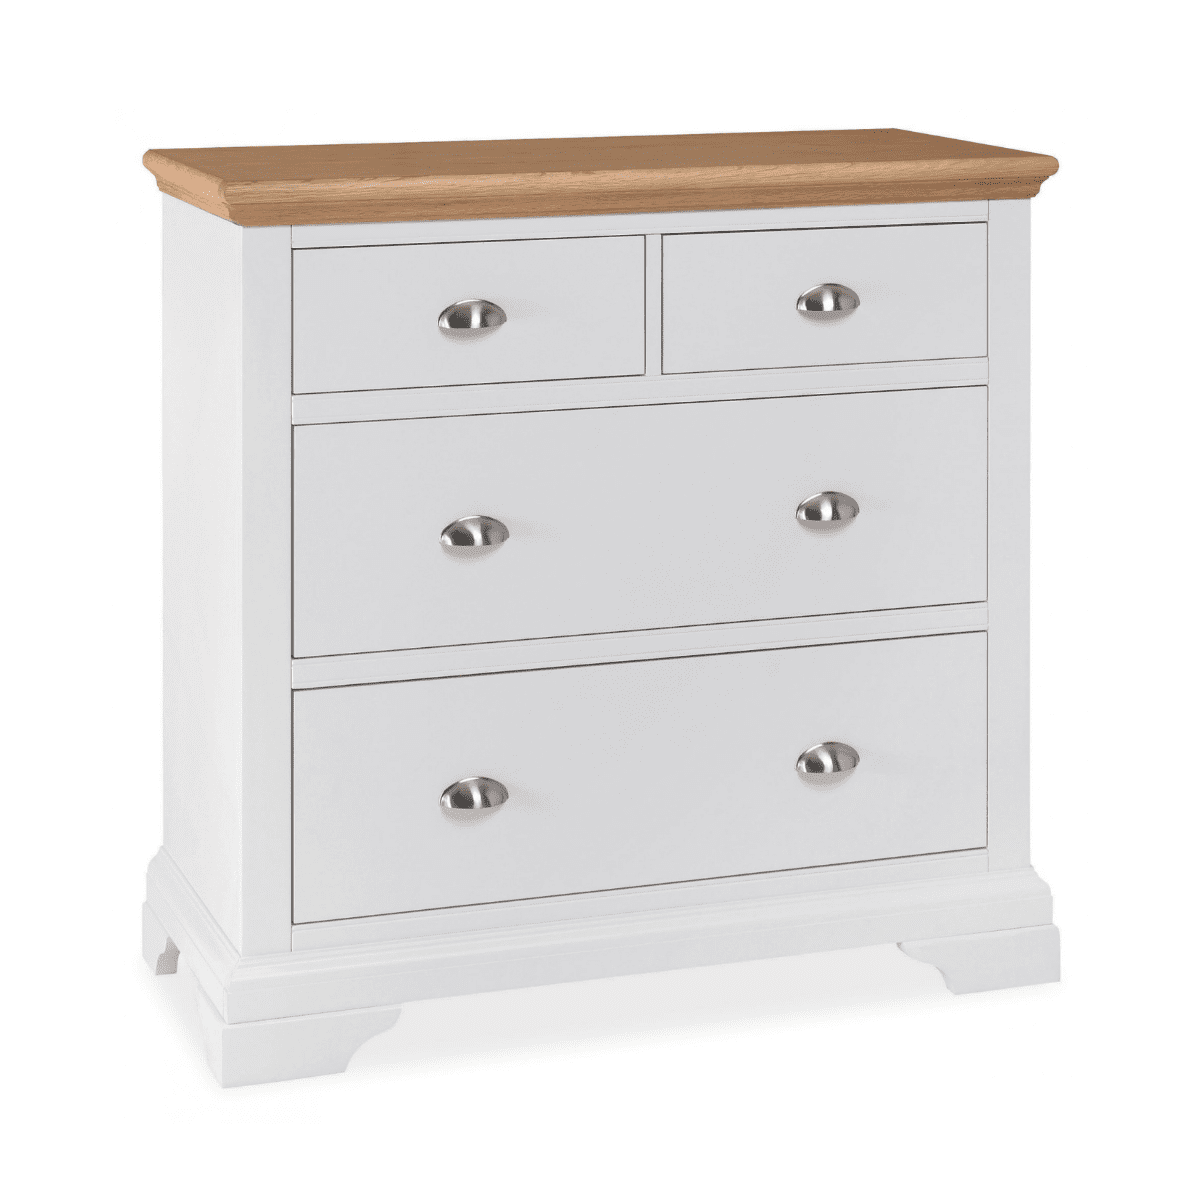 Hanoi White Chest of Drawers with Wooden Top